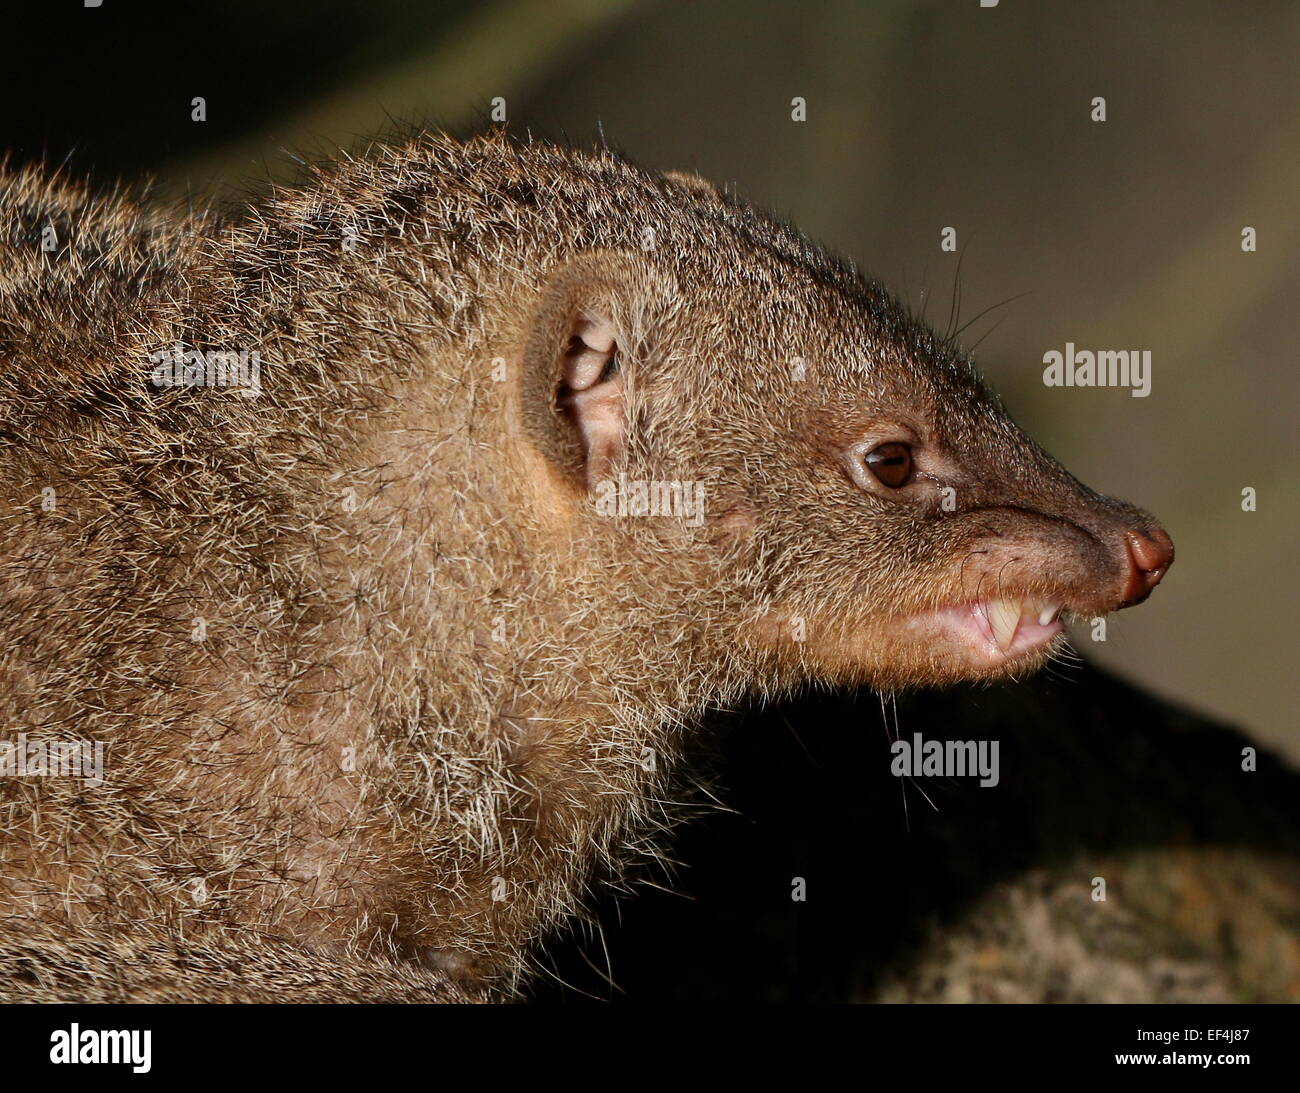 East African Banded mongoose (Mungos mungo) facing camera, close-up of the head, seen in profile Stock Photo